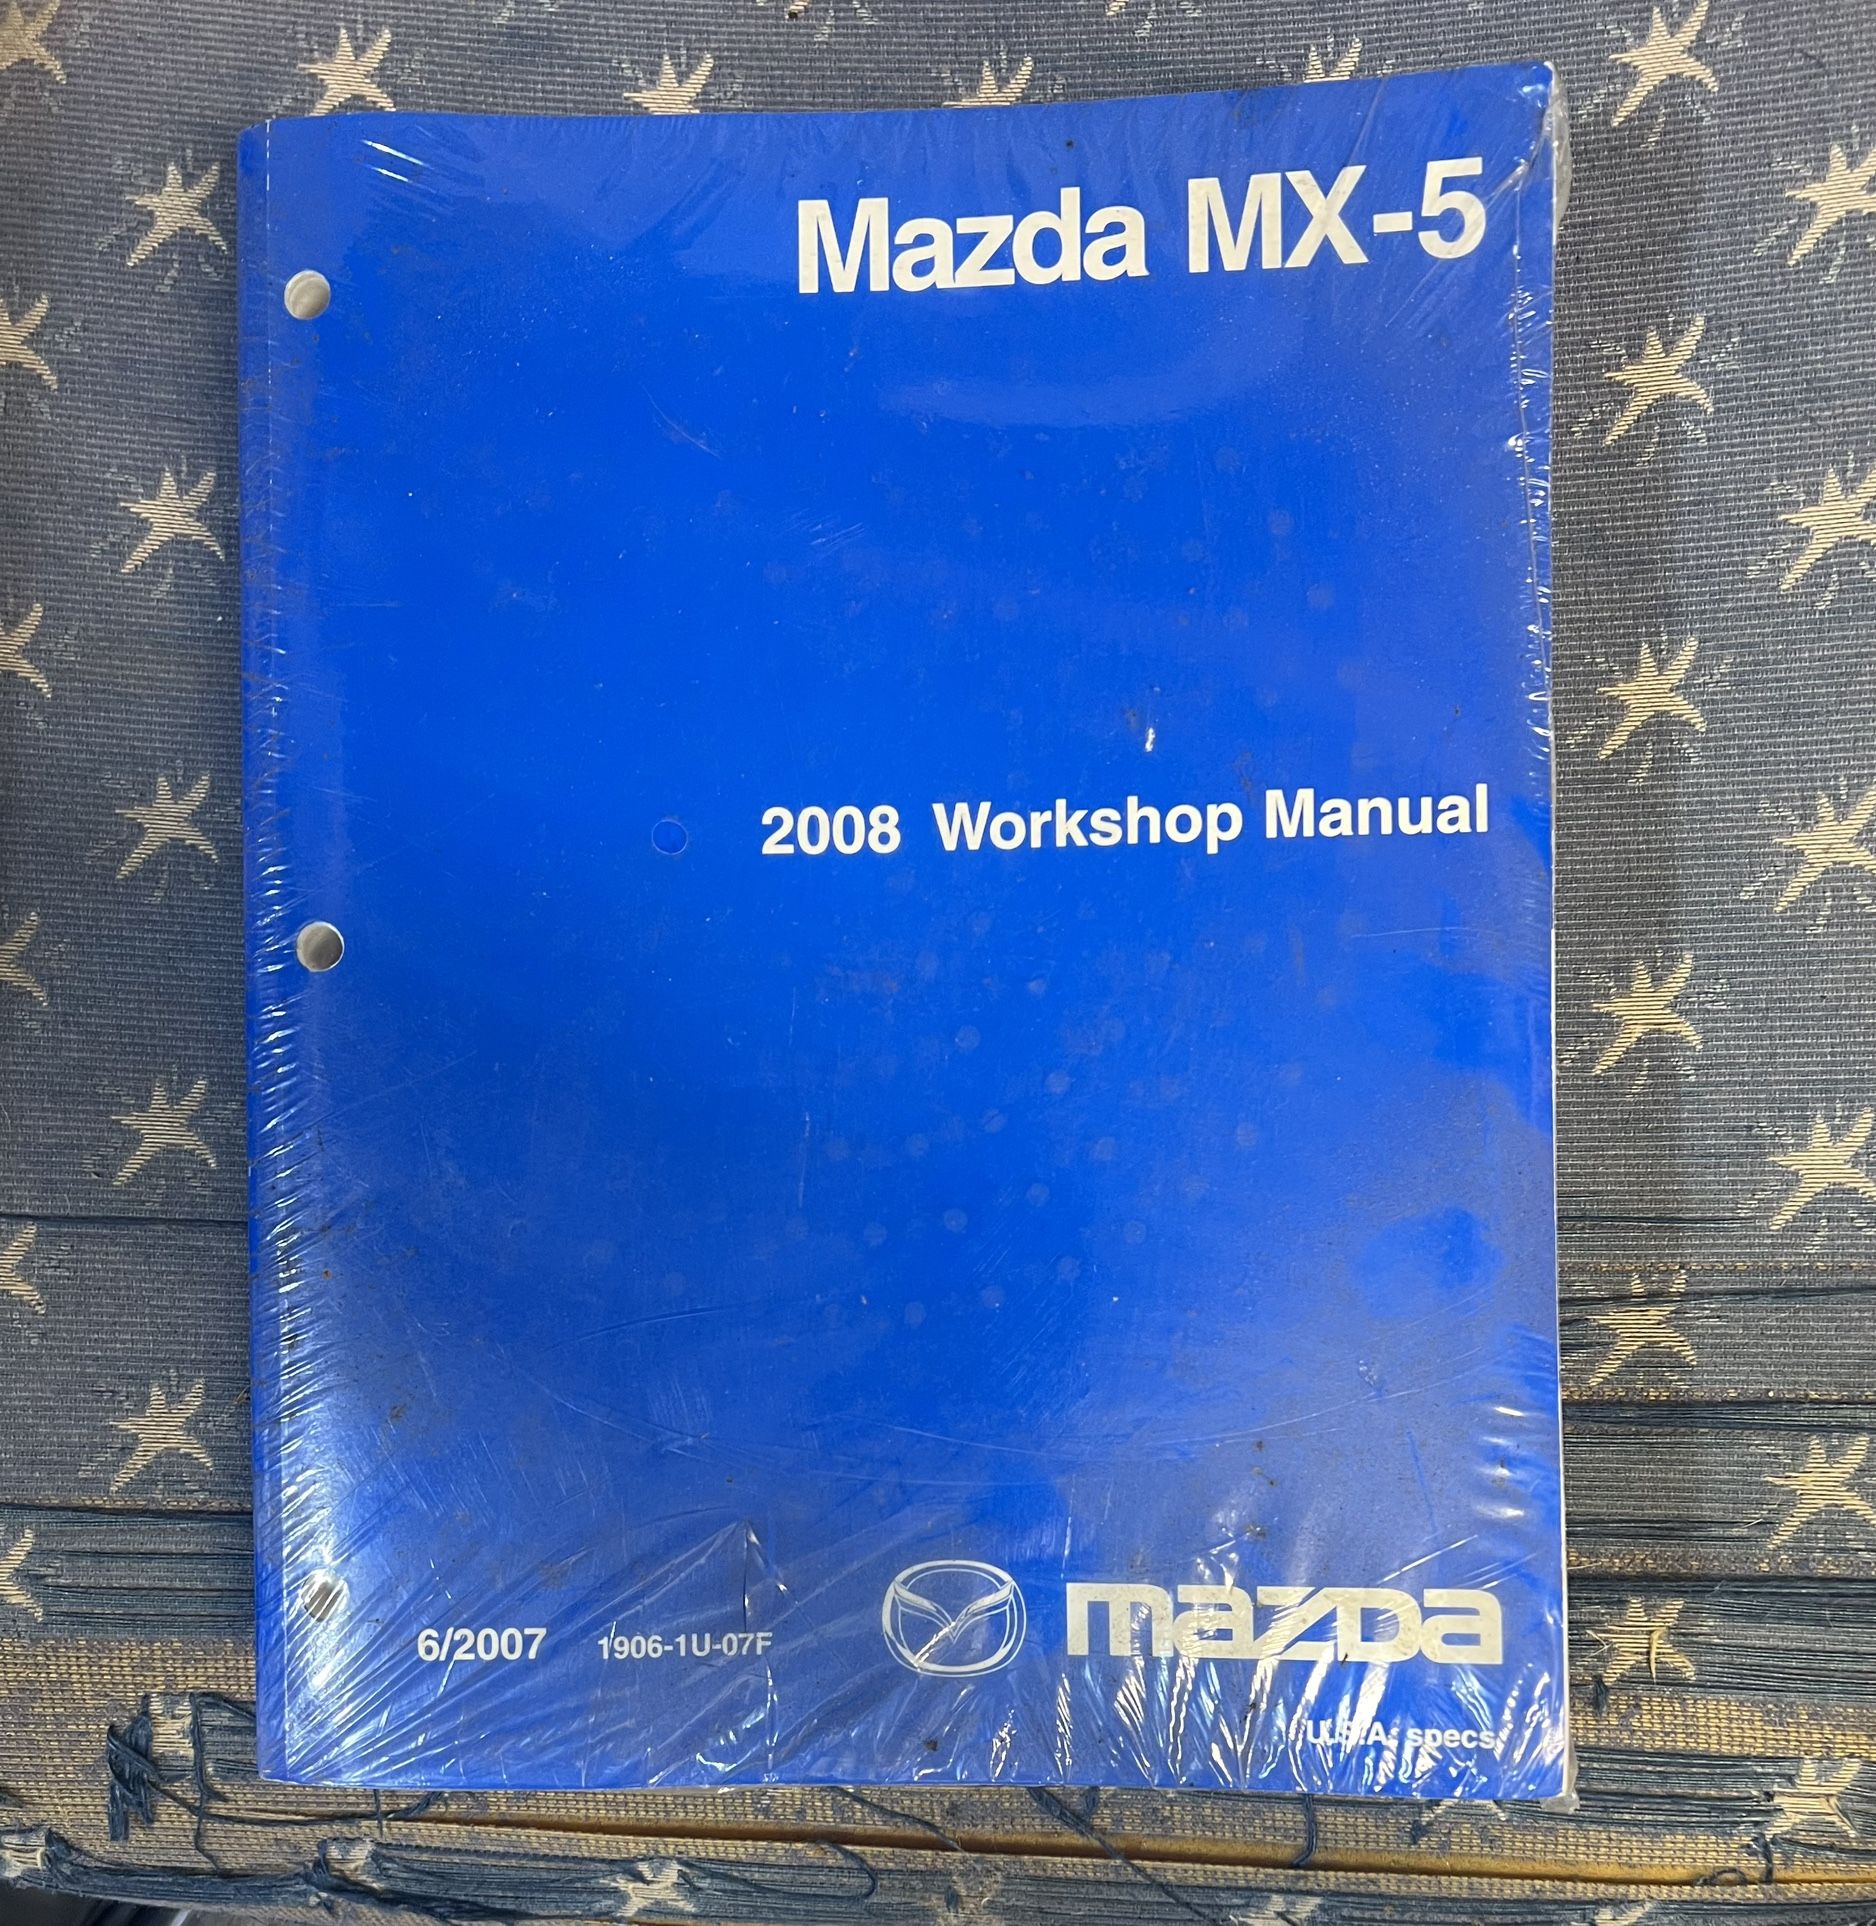 Workshop Manual And Wiring Diagram For 2008 Mazda MX-5